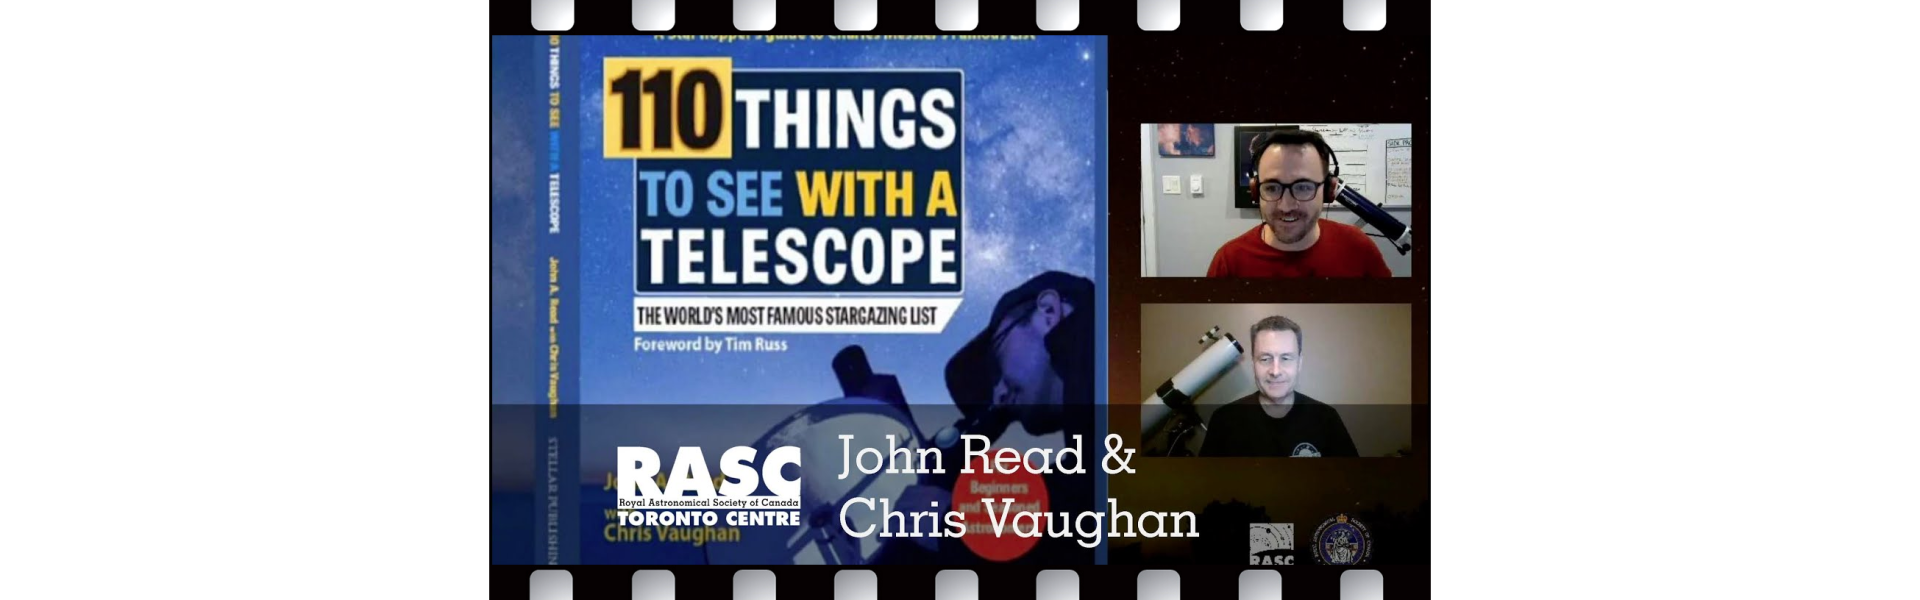 110 Things to See with a Telescope by John Read and Chris Vaughan